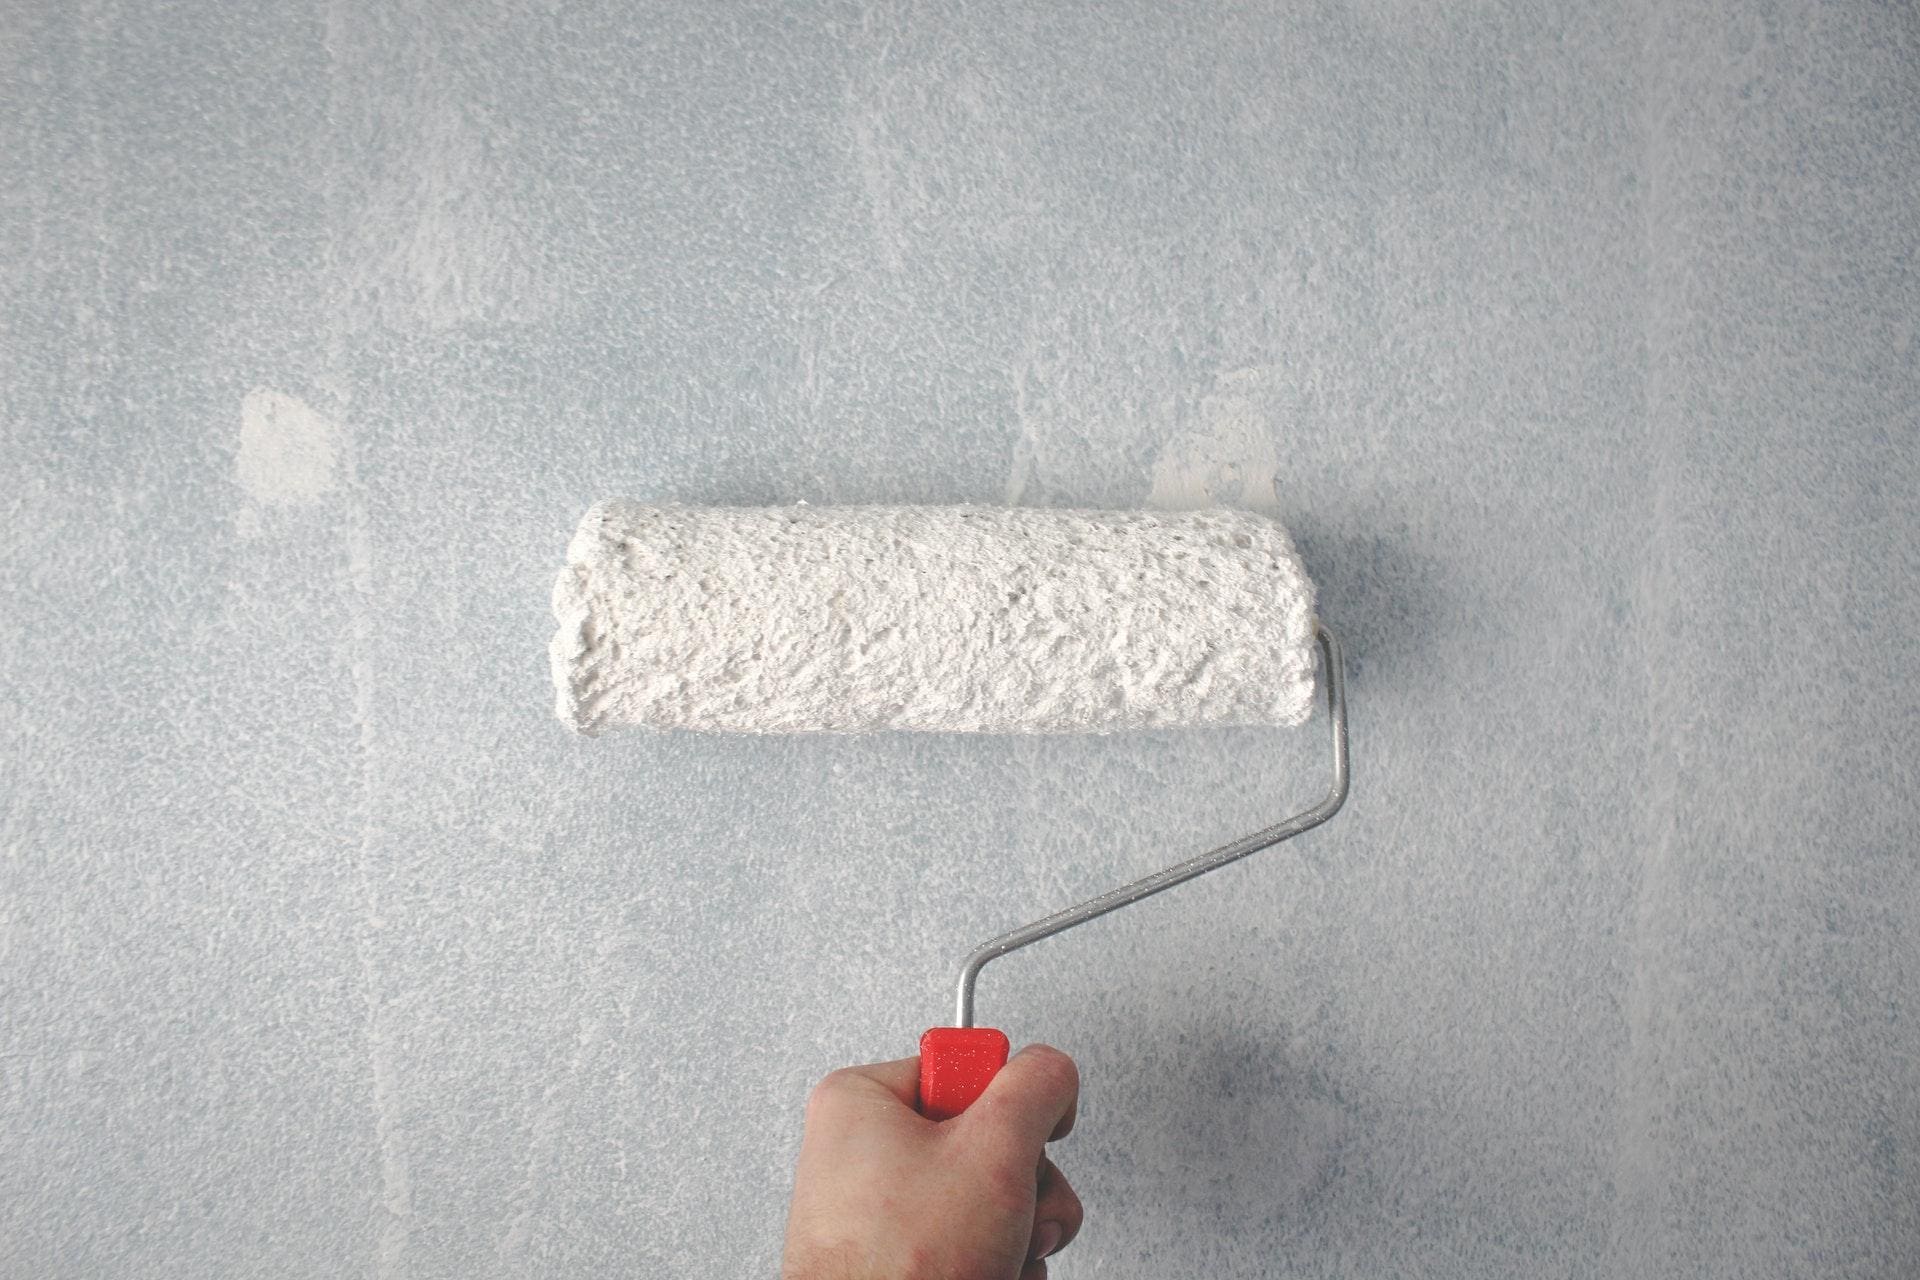 A painter applying paint on a wall.